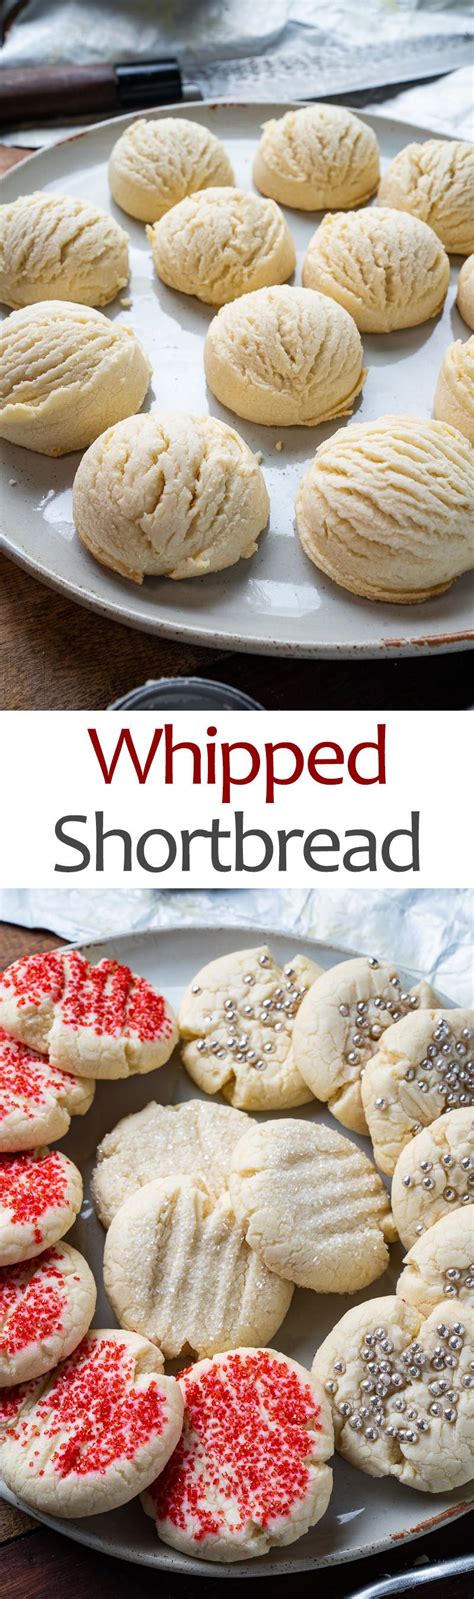 Whipped Shortbread Recipe Popular Cookie Recipe Buttery Cookies